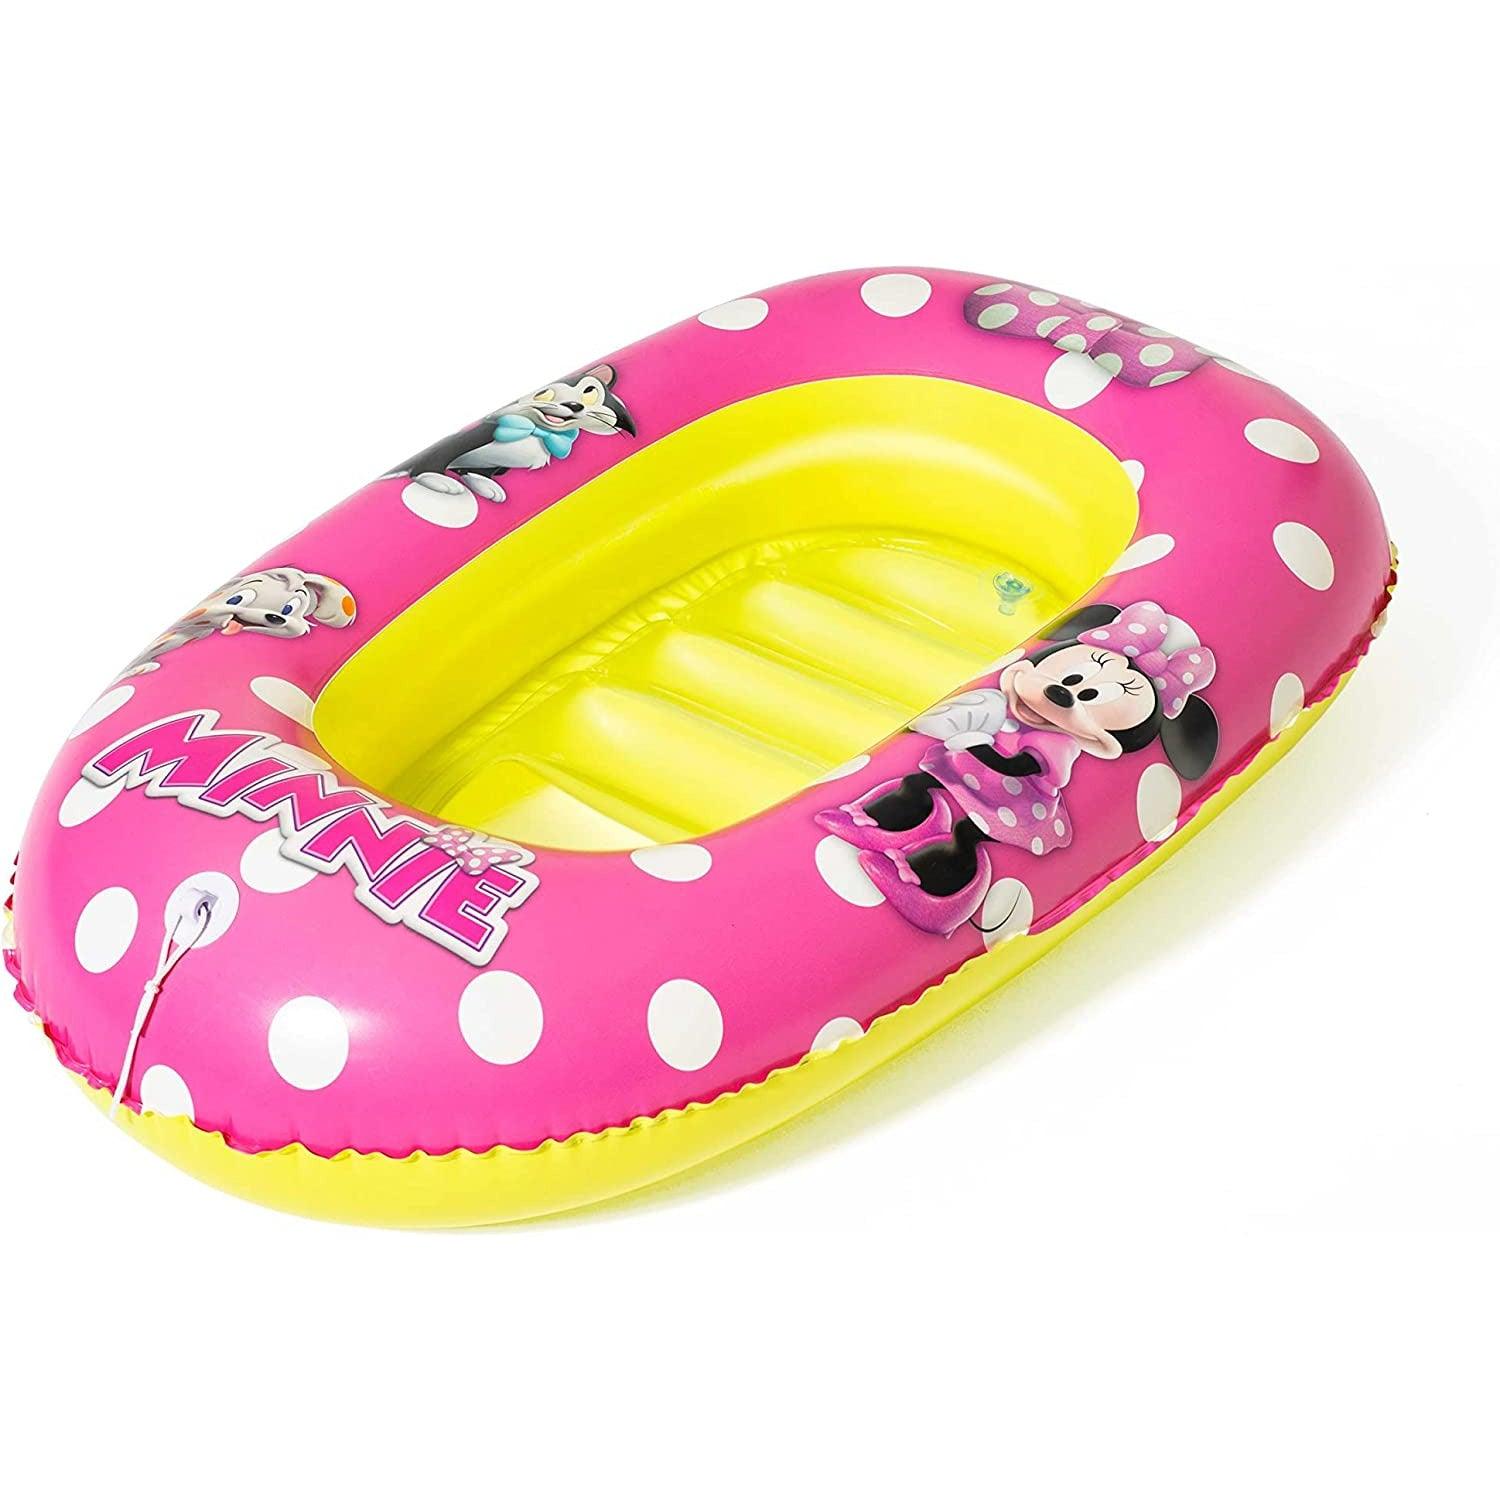 Bestway 27046 Inflatable Mickey Float from Bestway ‎112 x 71 x 15 cm - BumbleToys - 8-13 Years, Boys, Eagle Plus, Floaters, Girls, Sand Toys Pools & Inflatables